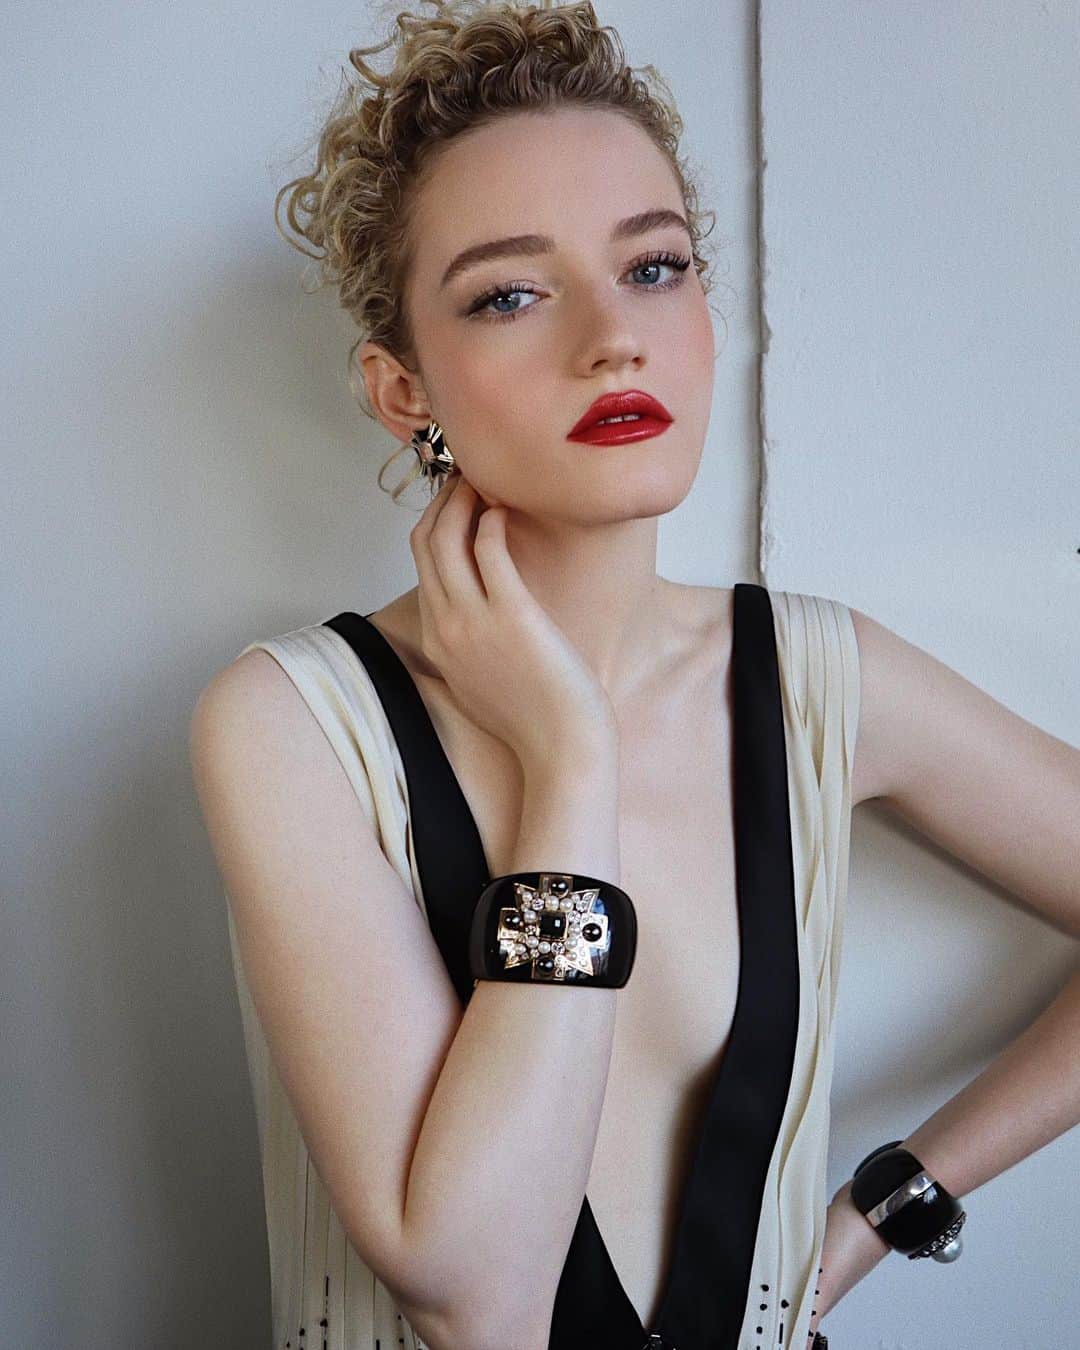 Hung Vanngoのインスタグラム：「#JuliaGarner (@juliagarnerofficial) for the #GoldenGlobes Awards this evening ❤️. Styling  @elizabethsaltzman  Nails @tony748474  Hair @bobbyeliot  Makeup @hungvanngo using @chanel.beauty @welovecoco  #welovecoco #WorkingWithChanel ❤️ Here is a full products breakdown:  SKIN PREP: Hydra Beauty Nourishing Lip Care Hydra Beauty Micro Serum Intense Replenishing Hydration Hydra Beauty Micro Gel Yeux Intense Smoothing Eye Gel Hydra Beauty Micro Creme Fortifying Replenishing Hydration  FACE: Le Beiges Healthy Glow Foundation Hydration and Longwear in shade BR22 Le Correcteur De Chanel Longwear Concealer in shade 10 Le Beiges Healthy Glow Bronzing Cream (Soleil Tan Bronze Universel) Le Beiges Healthy Glow Sheer Powder in shade 20 Baume Essentiel in shade Printanier Fleurs De Printemps Blush and Highlighter Duo  EYEBROWS: Crayon Sourcils in 10 Blond Cendre Le Gel Sourcils in 350 Transparent  EYES: La Base Ombre Q Paupieres Longwear Eyeshadow Primer Ombré Premiere Longwear Cream Shadow in shades 844 Gemme Doree and 840 Patine Bronze Stylo Yeux Waterproof Long Lasting Eyeliner in shade 932 Noir Petrole Le Volume De Chanel Mascara in shade 10 Noir  LIPS Rouge CoCo Bloom in shade 134 Sunlight (Waitlist is now open on redcarpeybeauty.Chanel.com! ❤️)」